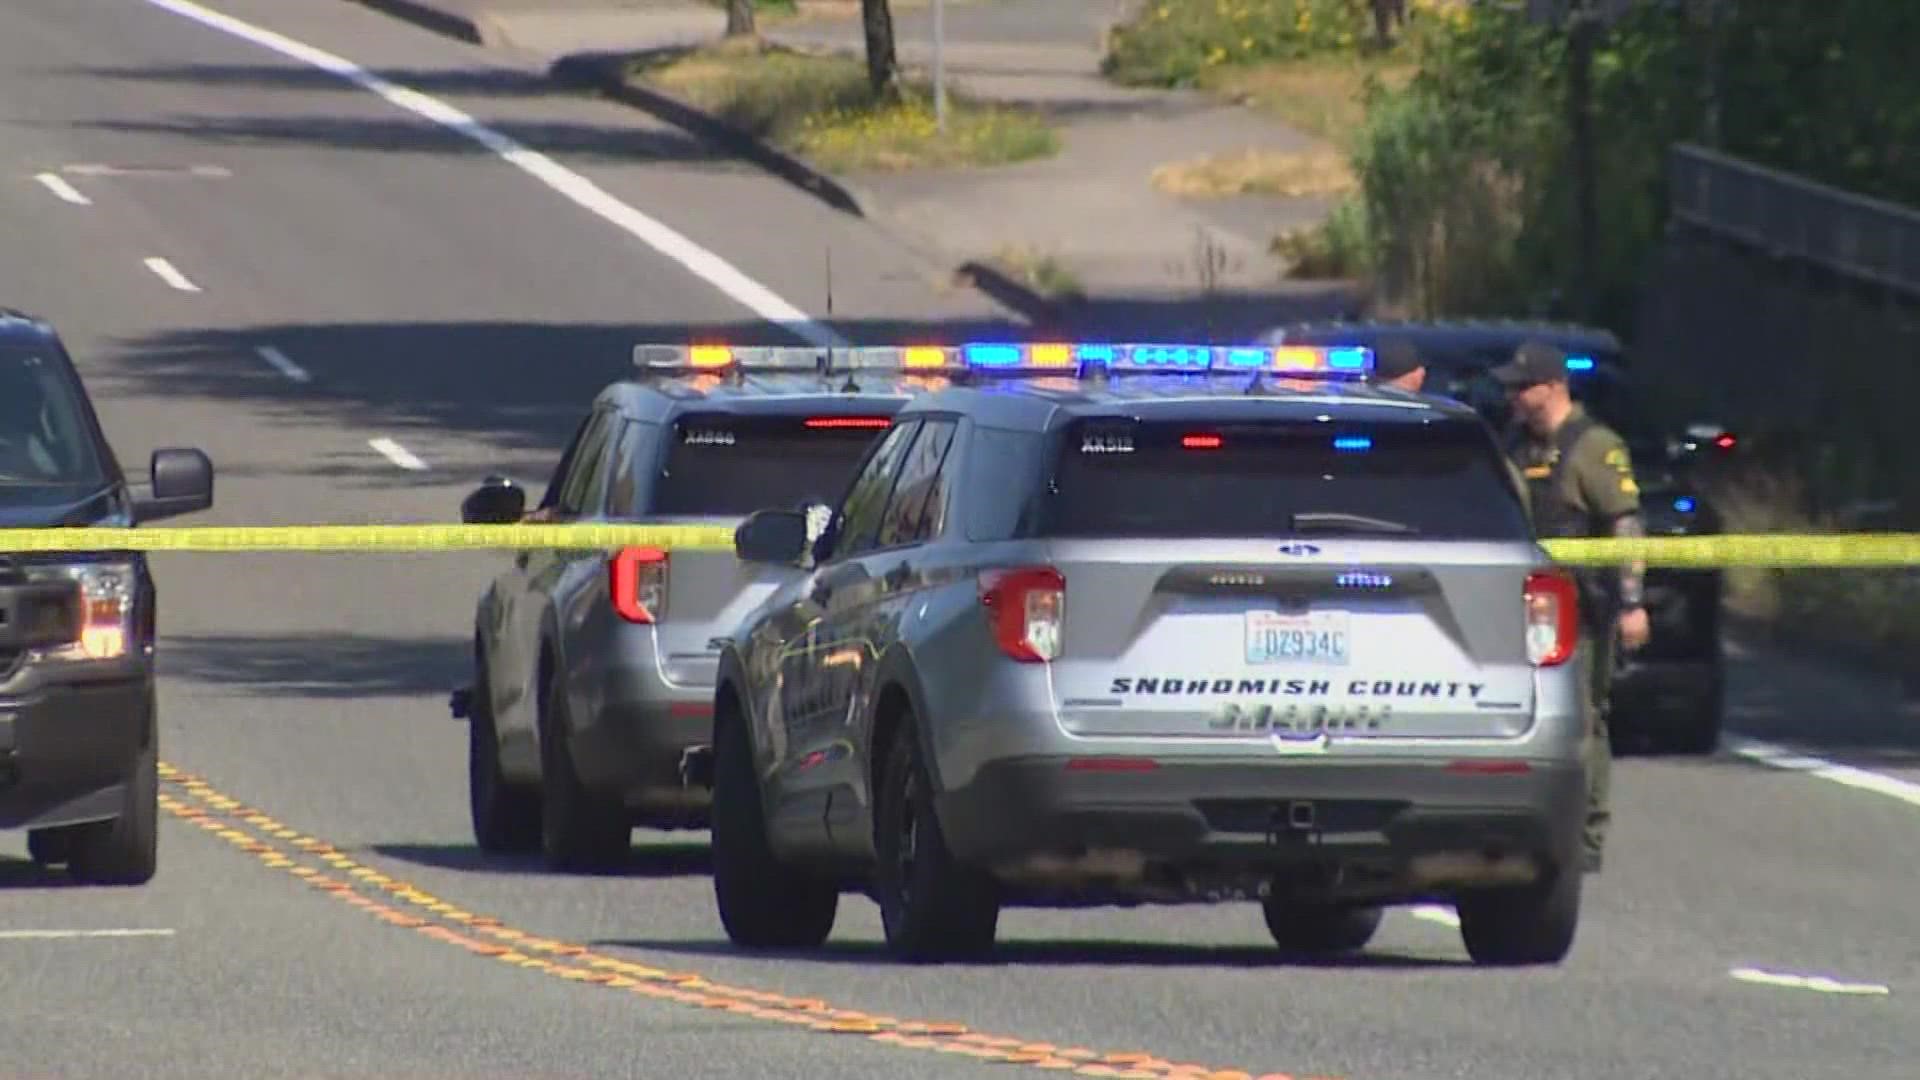 Lynnwood police said two teenage boys died after they were shot at Spruce Park Thursday night.